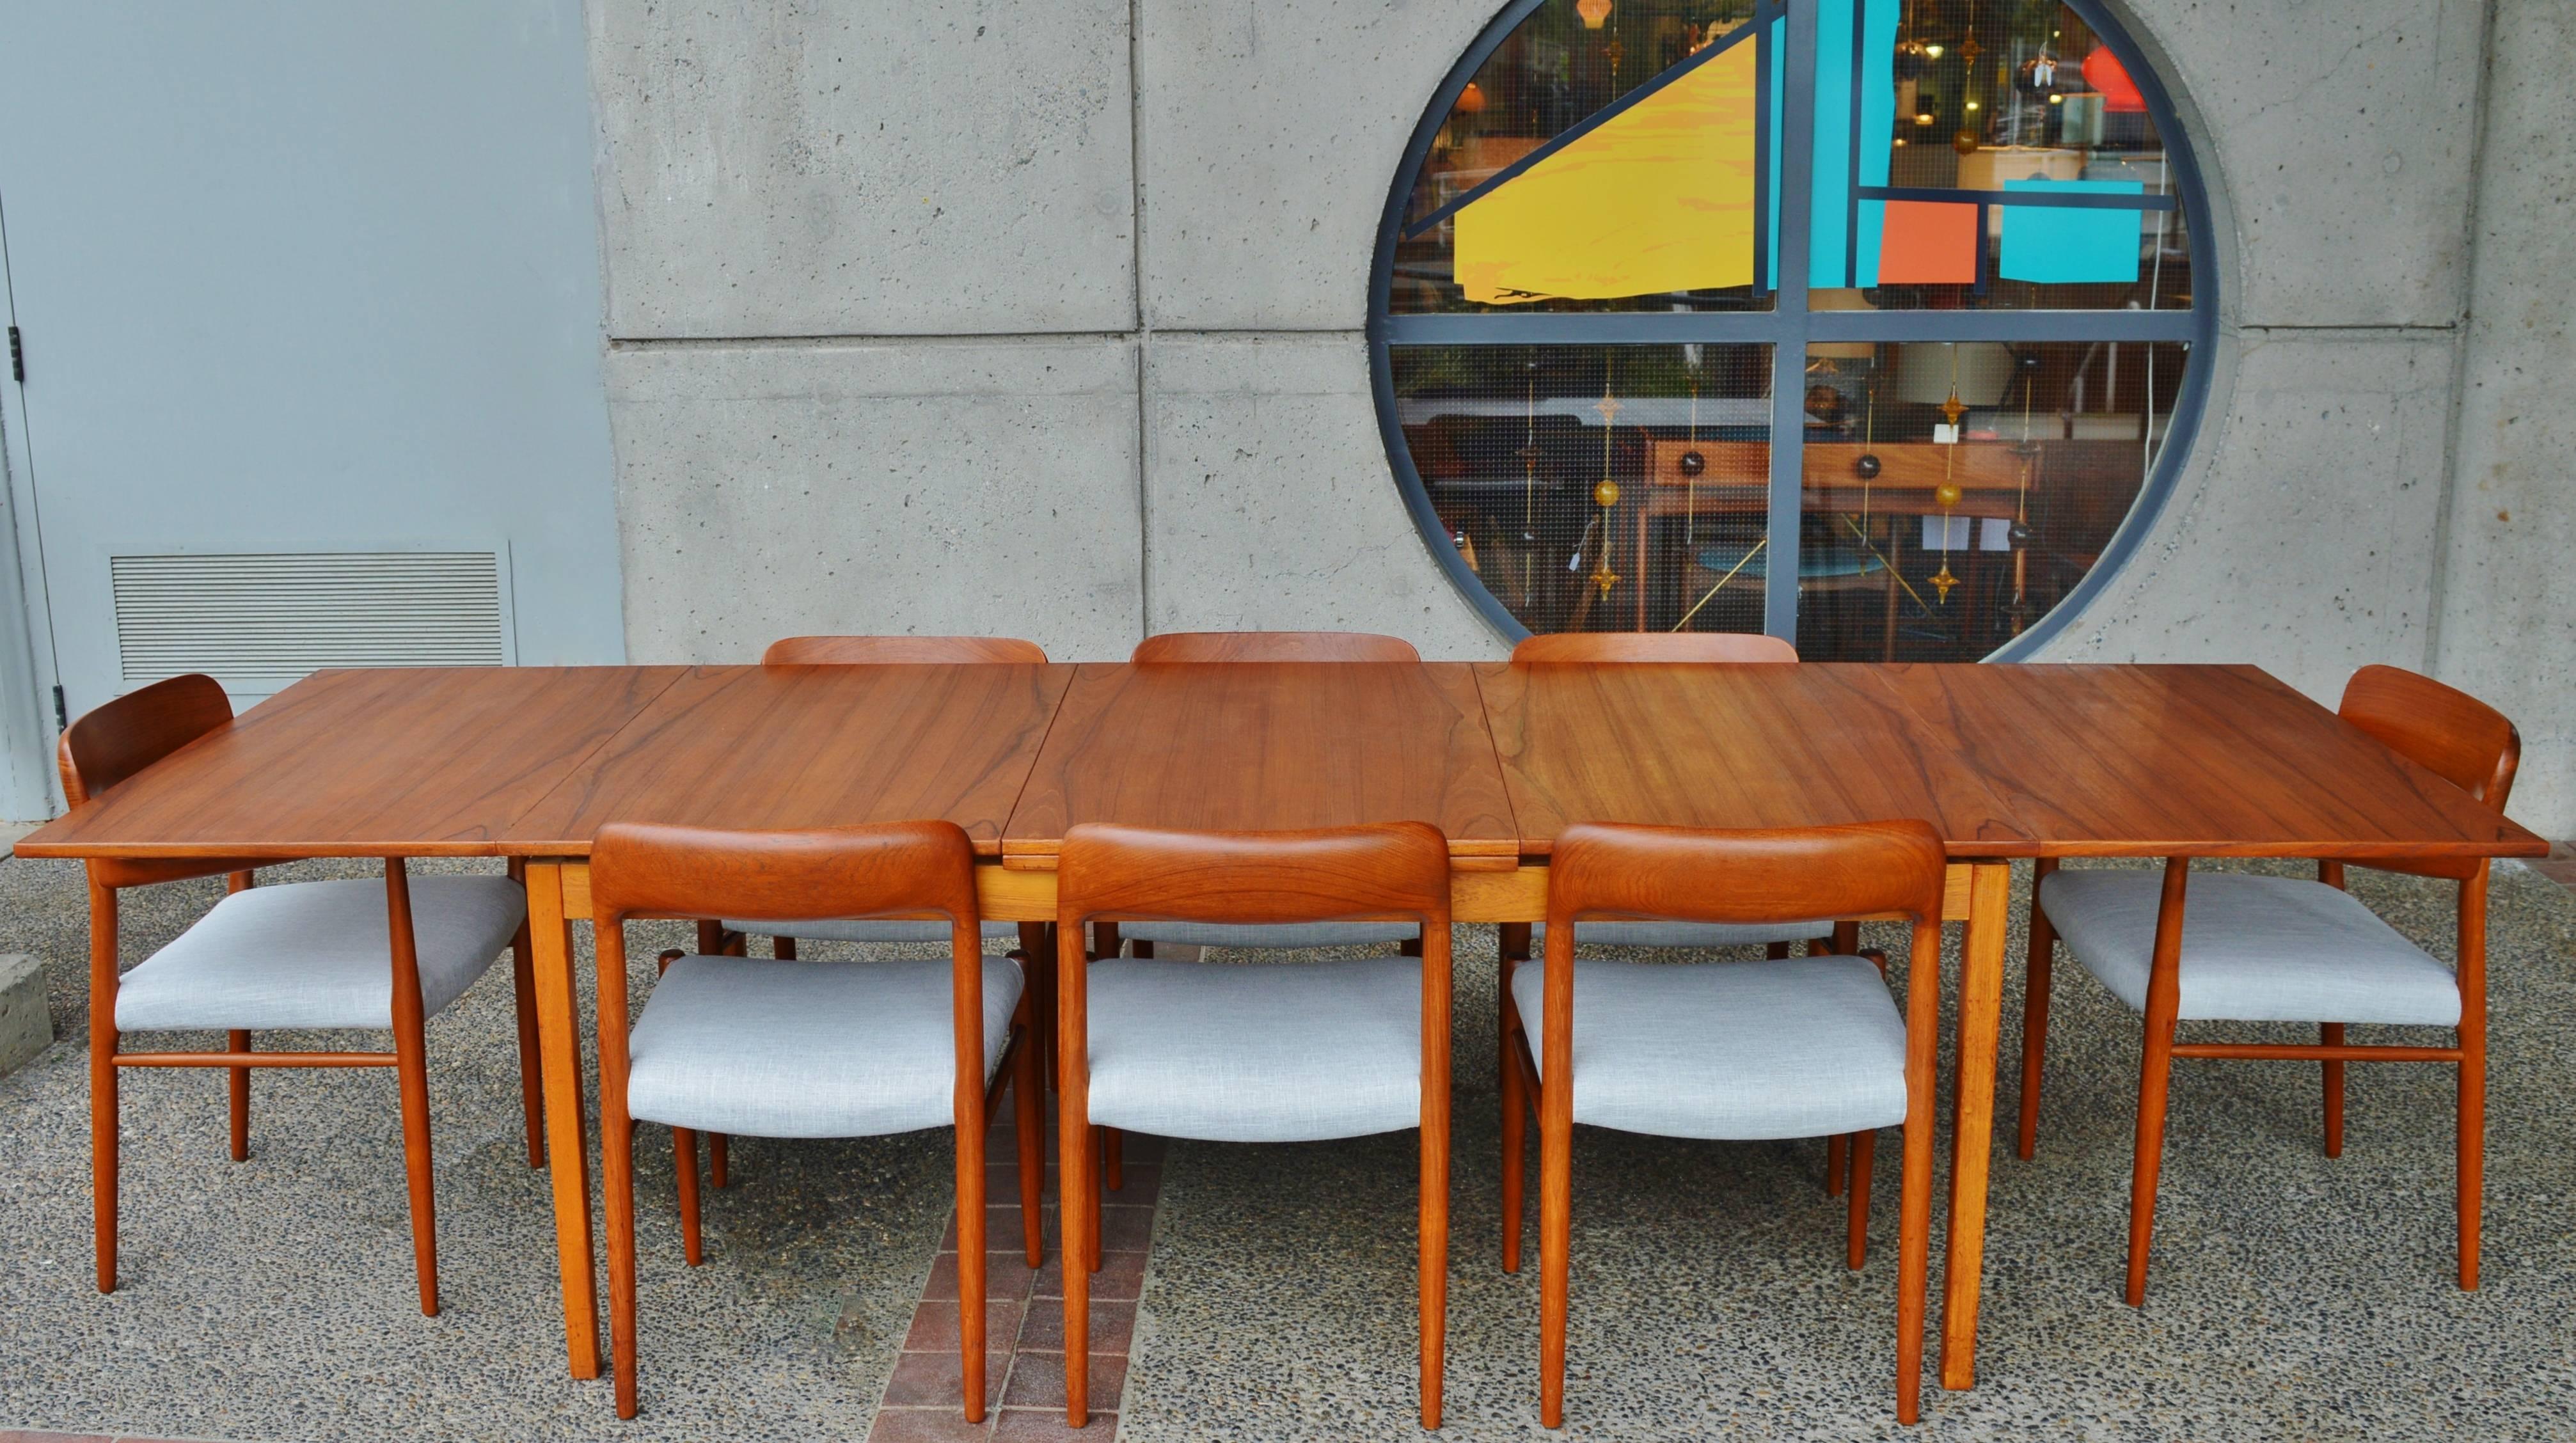 This amazing, top quality Danish Modern teak dining table has two huge flip open leaves that expand the table from seating six or eight people, to seating up to 12! Cleverly designed, the large leaves pullout and two risers pop up to raise the table